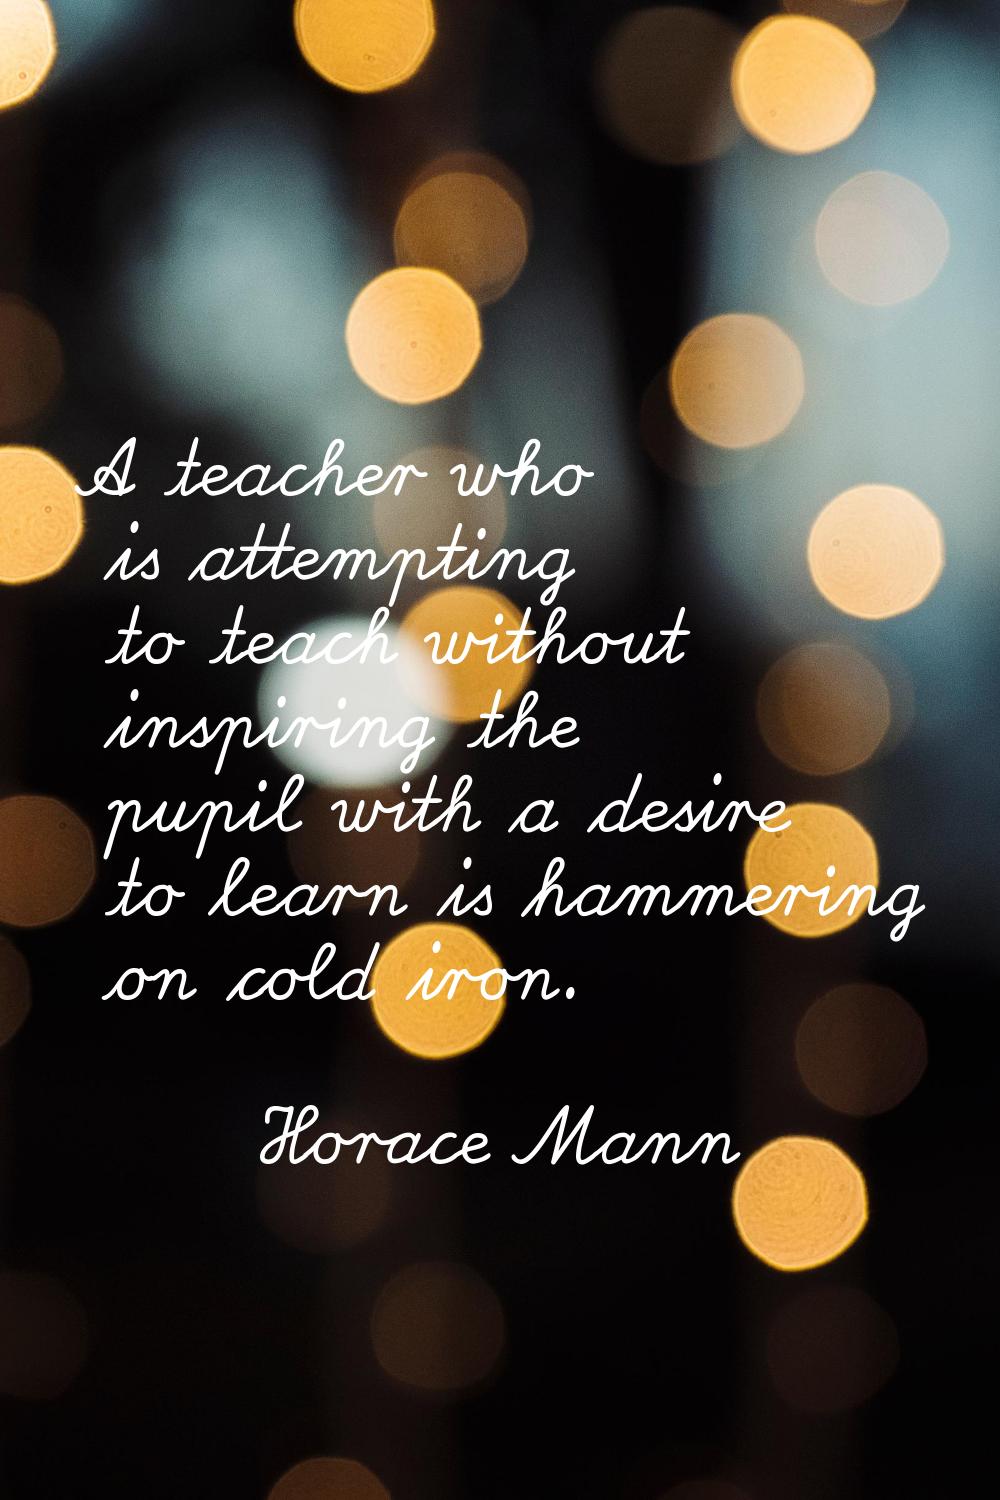 A teacher who is attempting to teach without inspiring the pupil with a desire to learn is hammerin